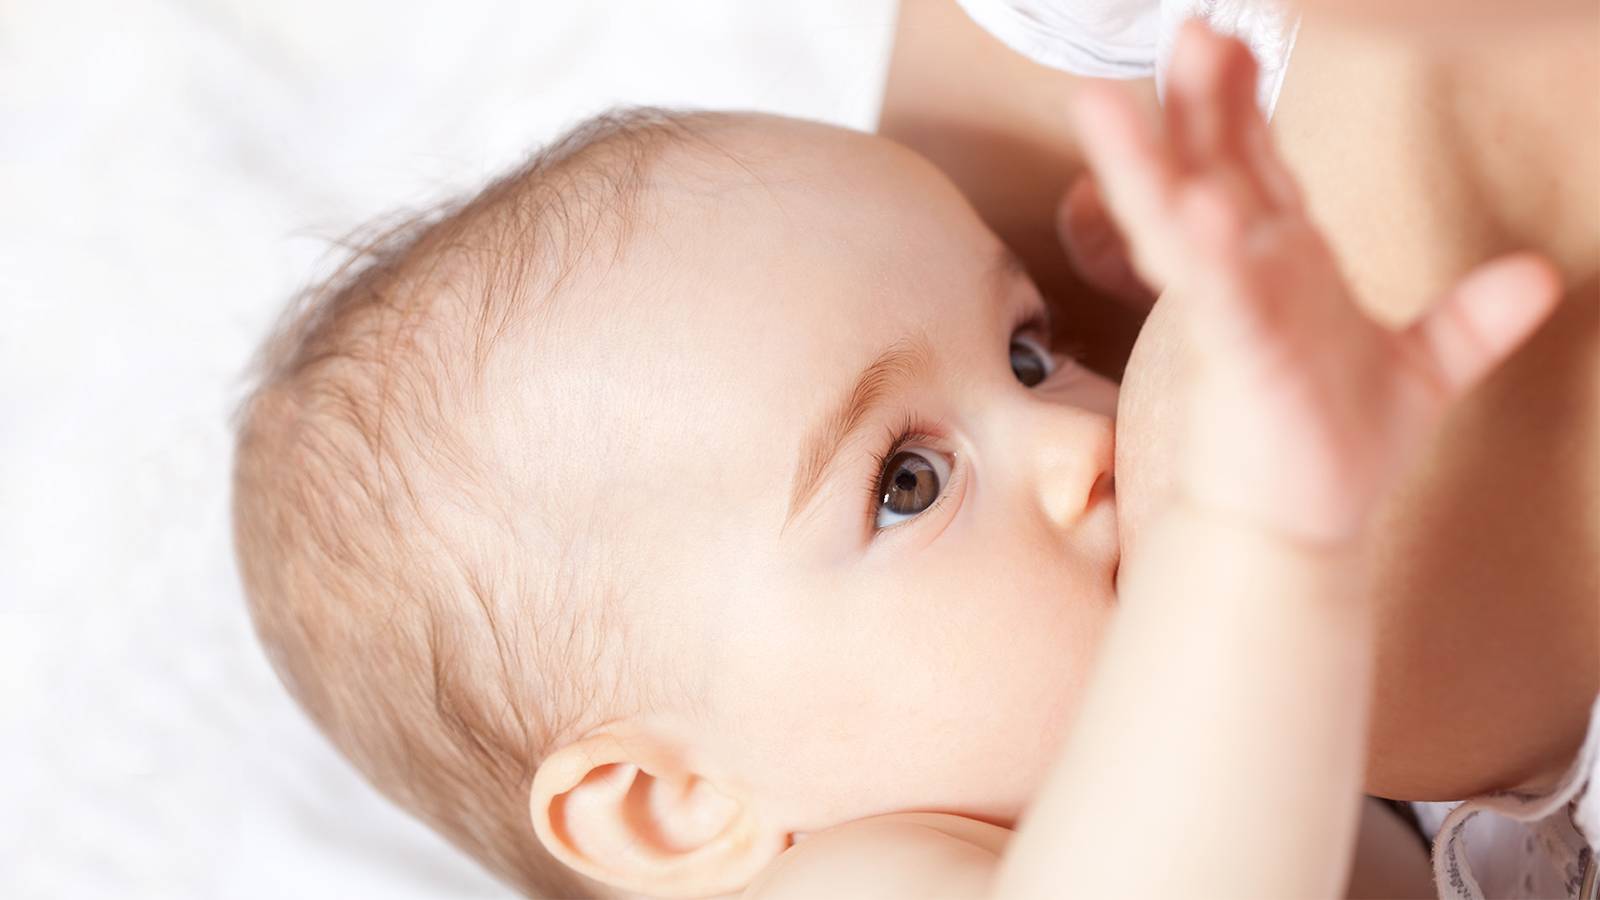 Babies-5-reasons-why-your-baby-bites-while-breastfeeding-01